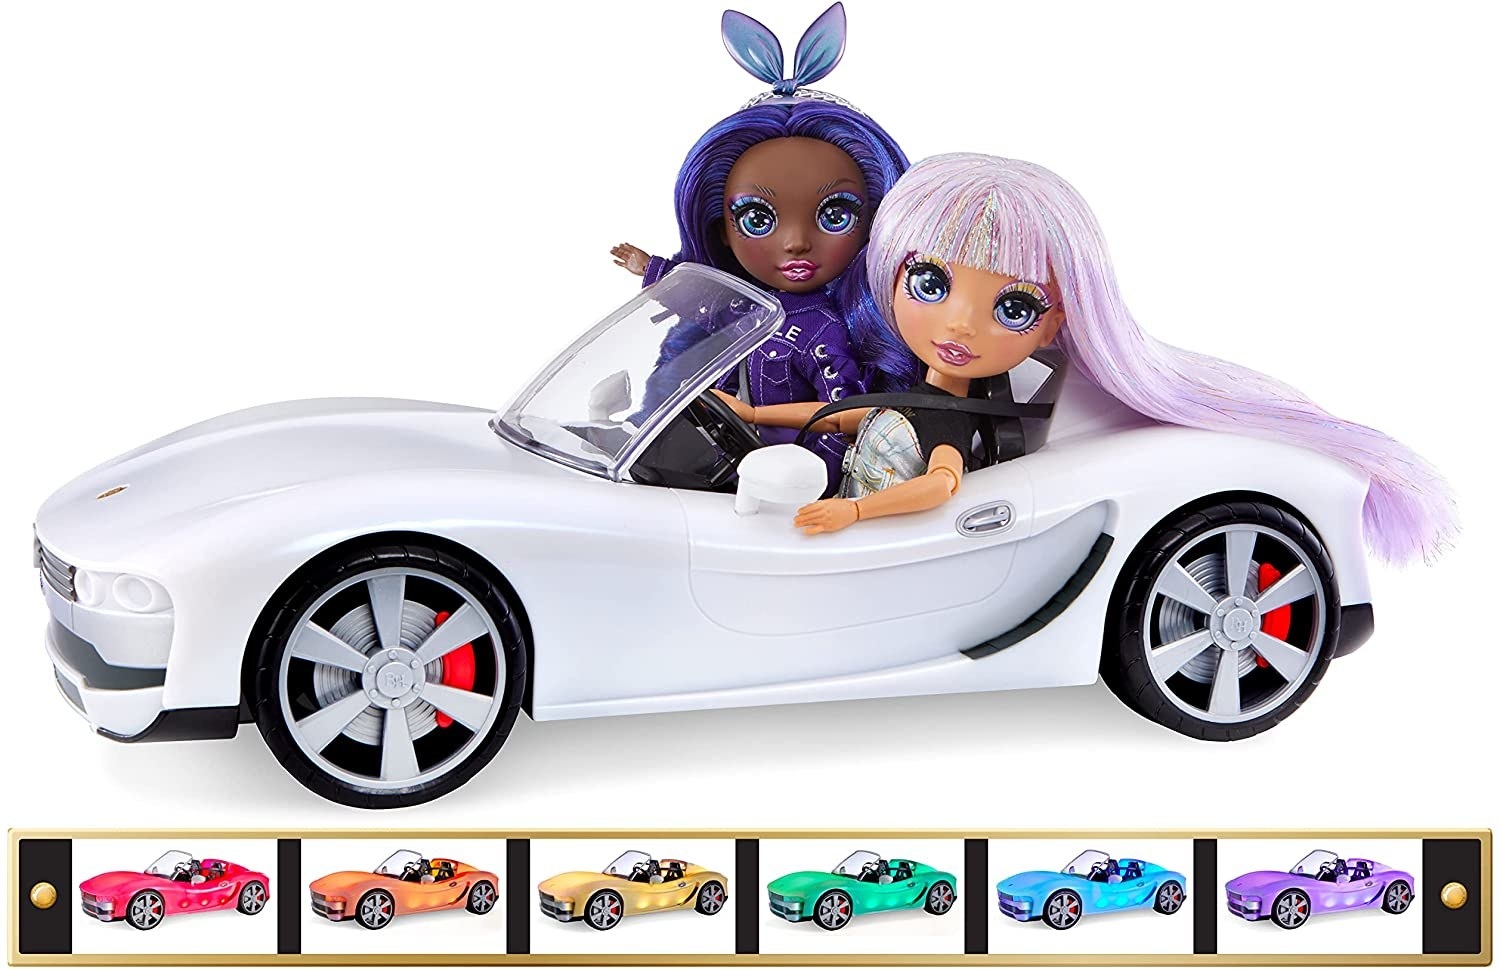 two rainbow high dolls in a car and color options the car can turn into including red orange yellow green blue and purple